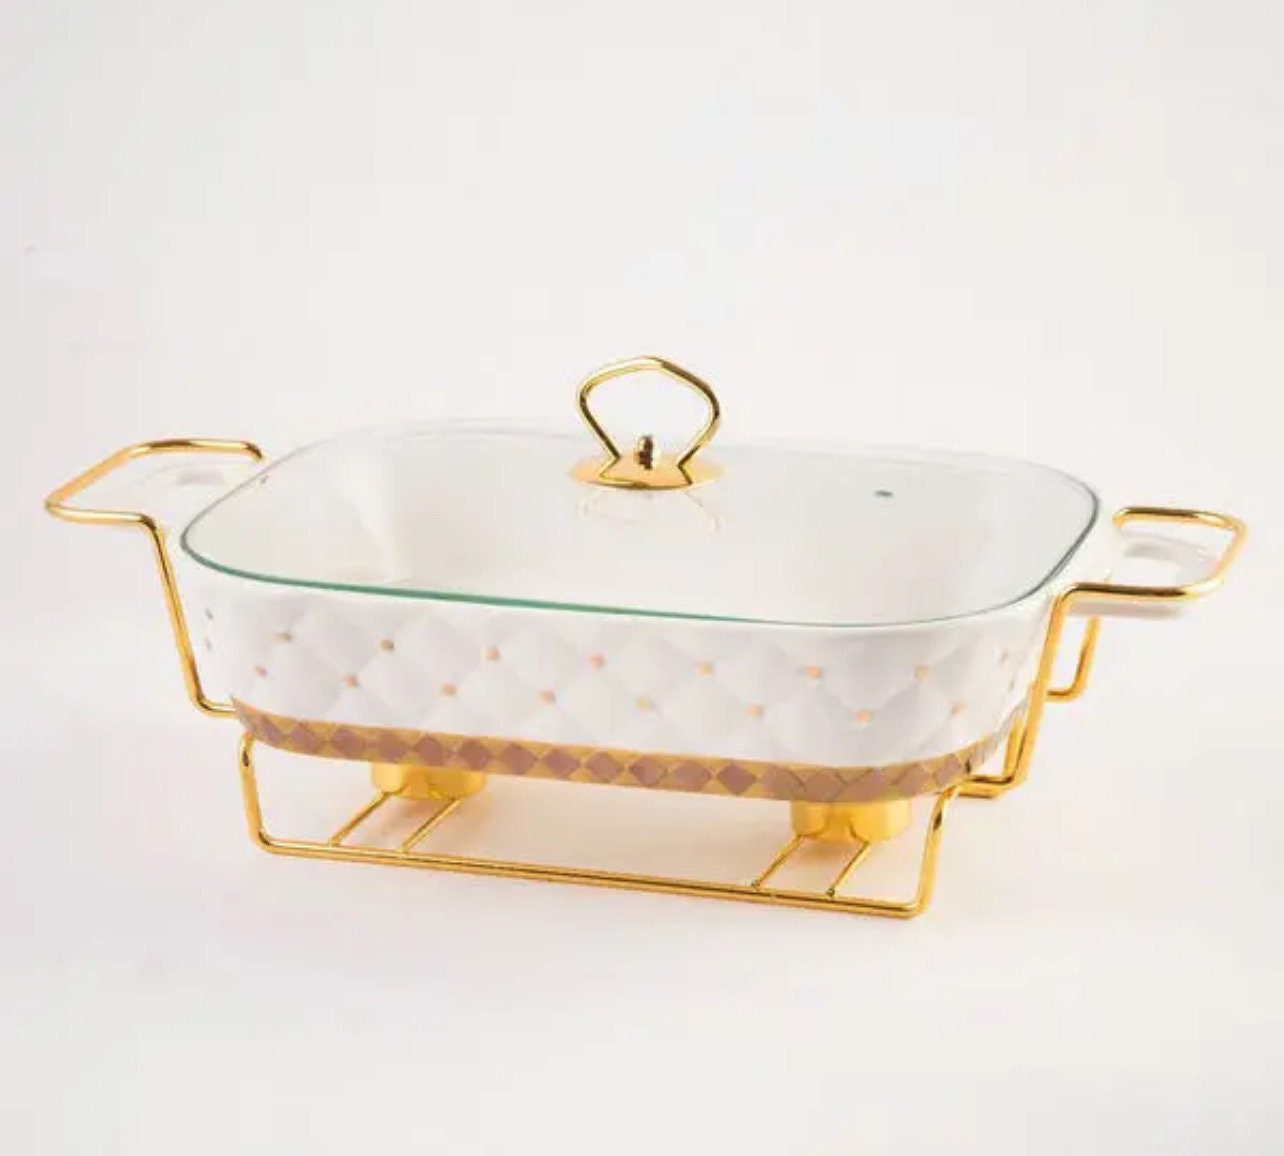 Rectangular Porcelain Casserole Warming Trays for Food, Ceramics Chafers, and Buffet Warmers Sets, Gold Plating Serving Dishes (Large 2.4 Quarts)